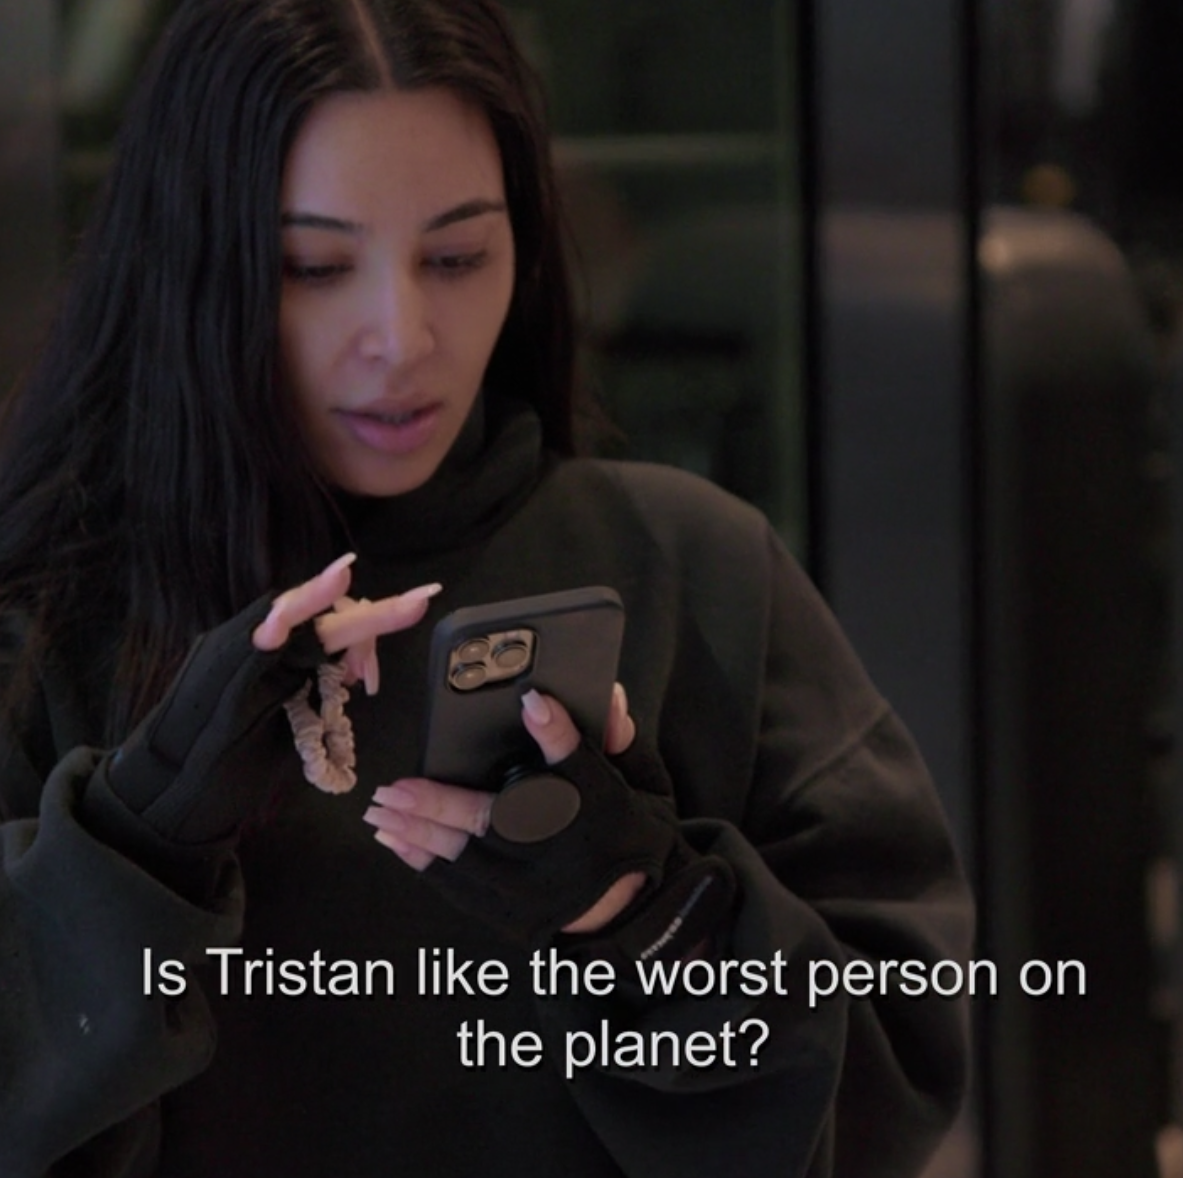 Kylie Jenner Calls Tristan Thompson the 